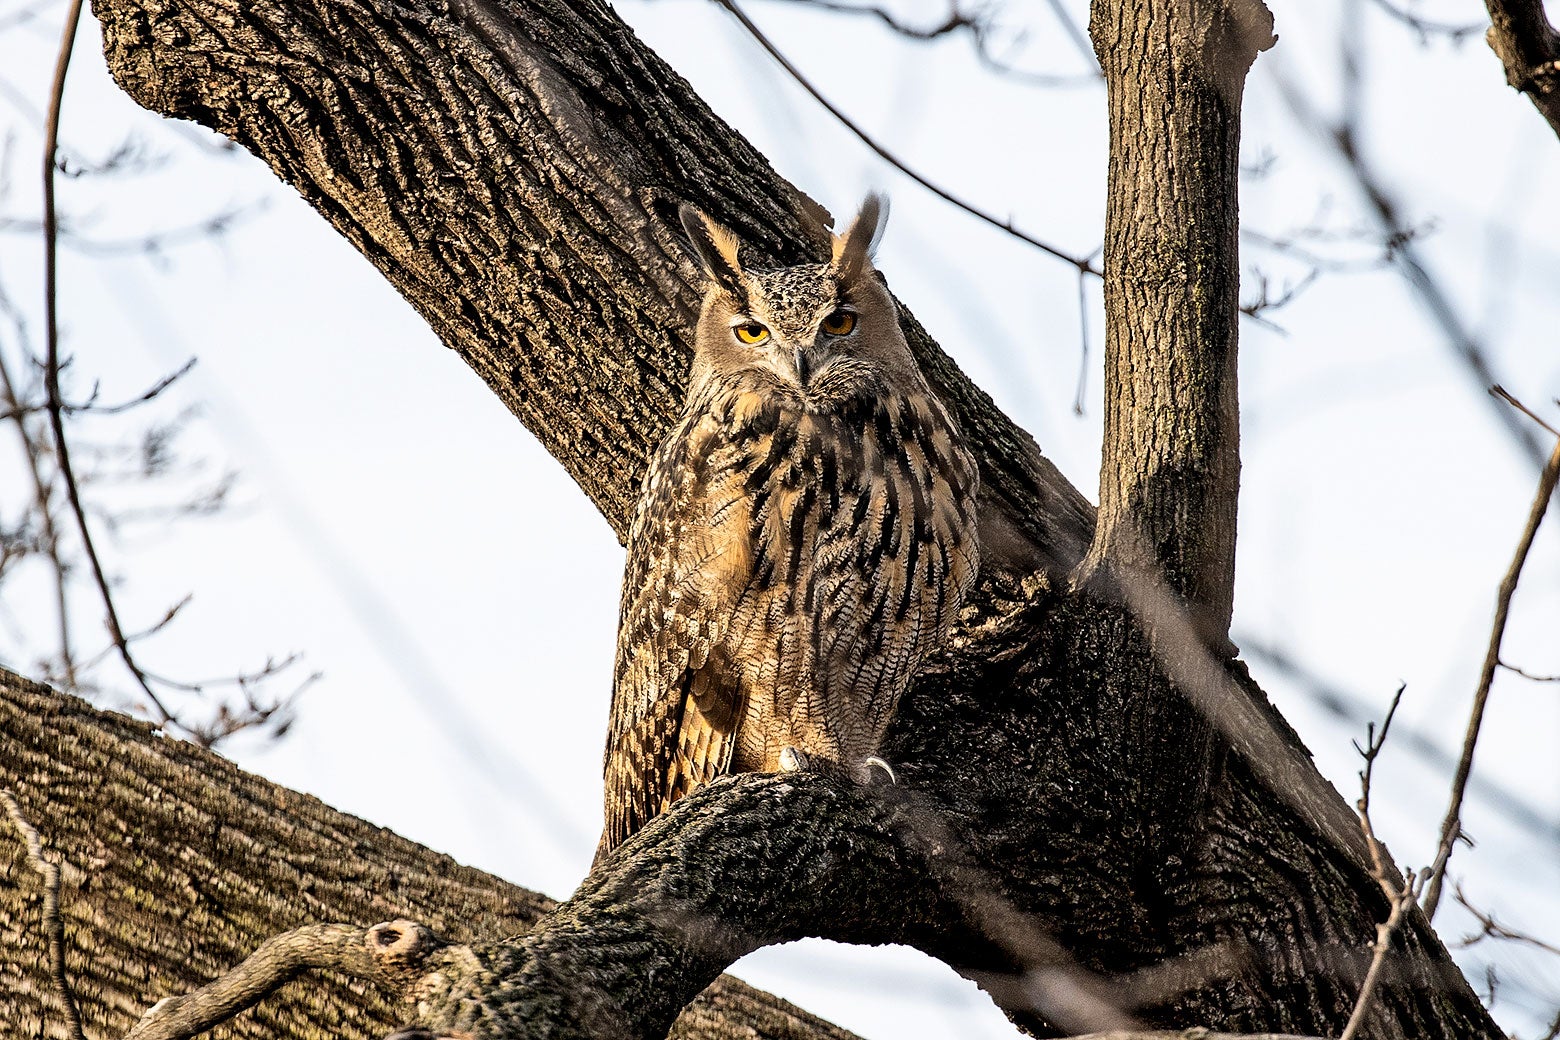 An owl in a tree. The owl has dramatic eyebrow-like feathers that stick up at a sharp angle. 